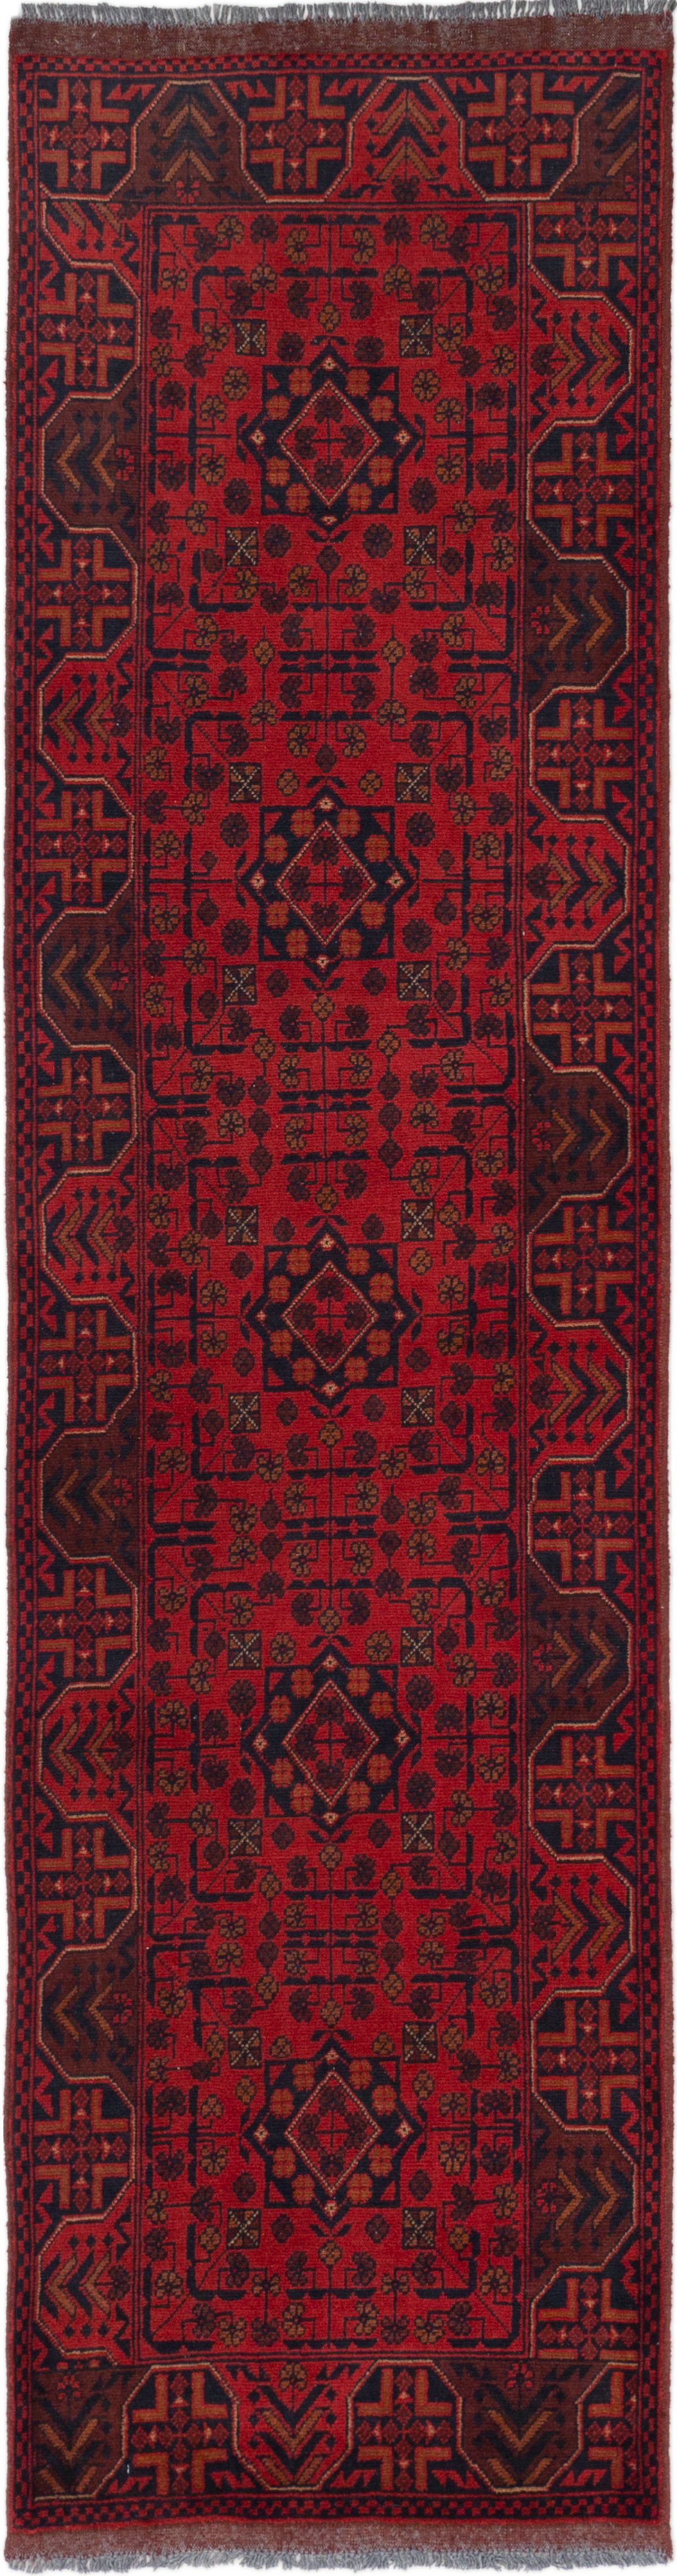 Hand-knotted Finest Khal Mohammadi Red Wool Rug 2'7" x 9'7" (14) Size: 2'7" x 9'7"  